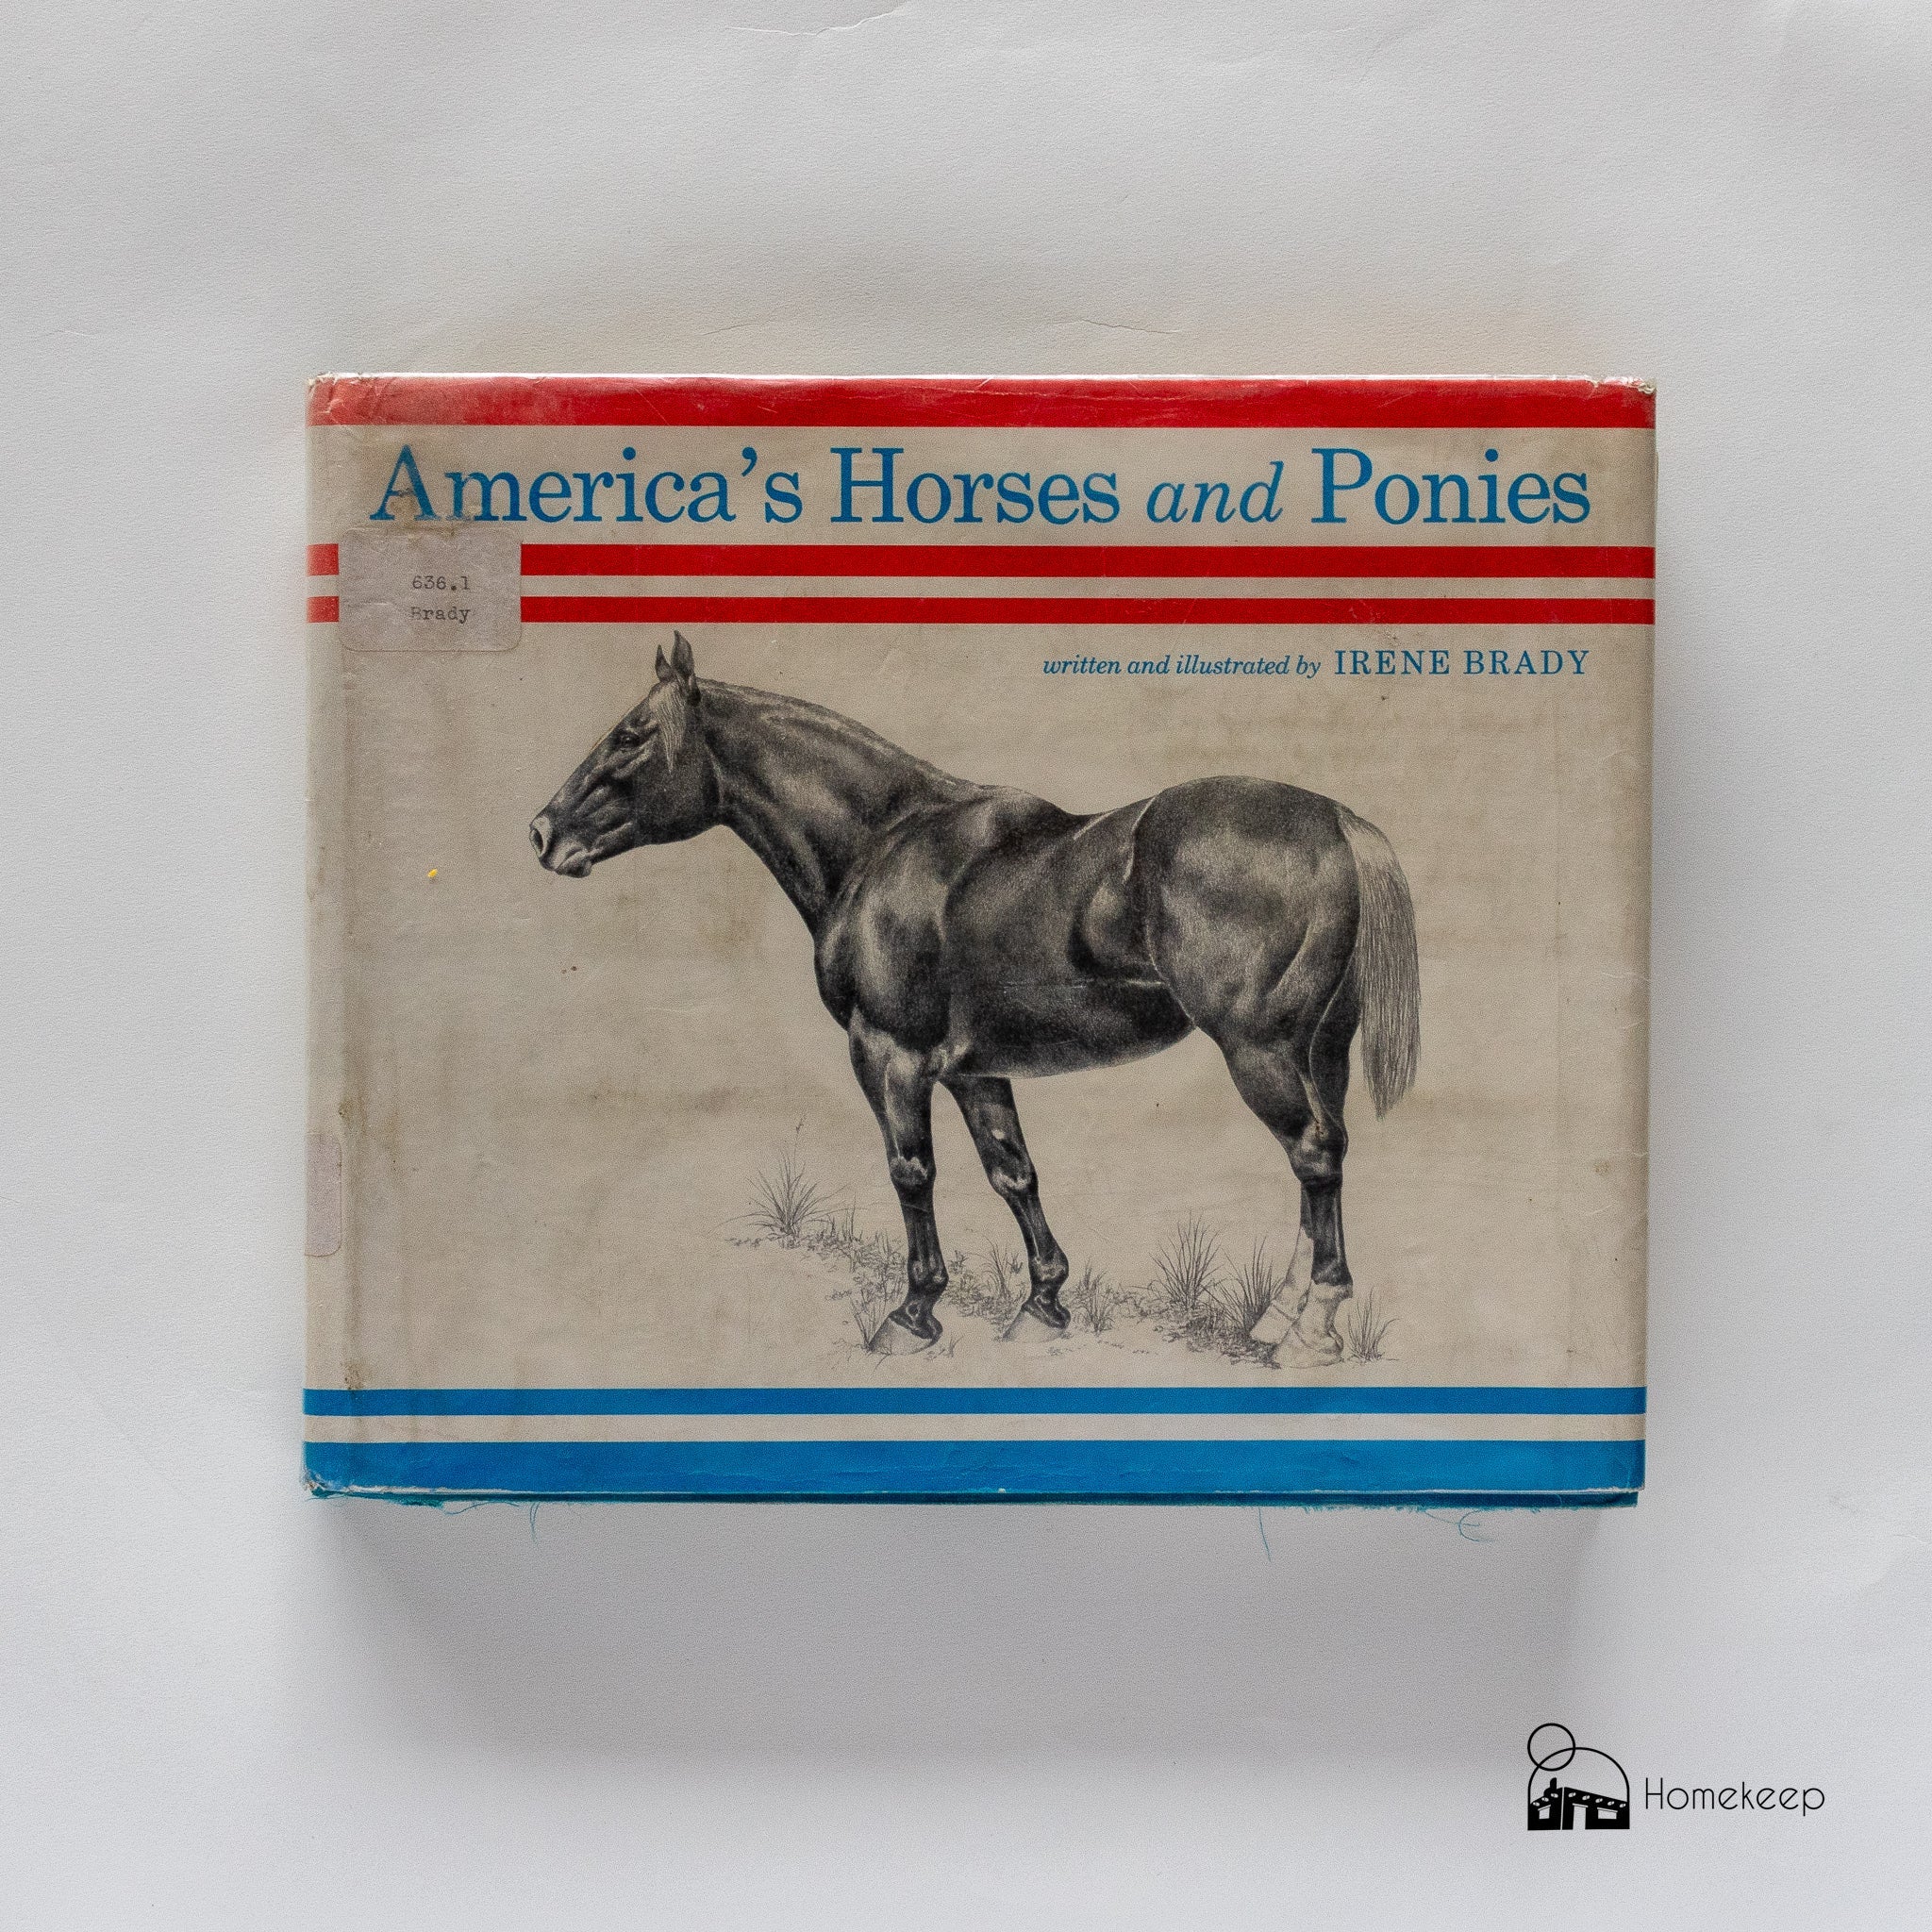 America's Horses and Ponies Written and Illustrated by Irene Brady - Homekeep Market